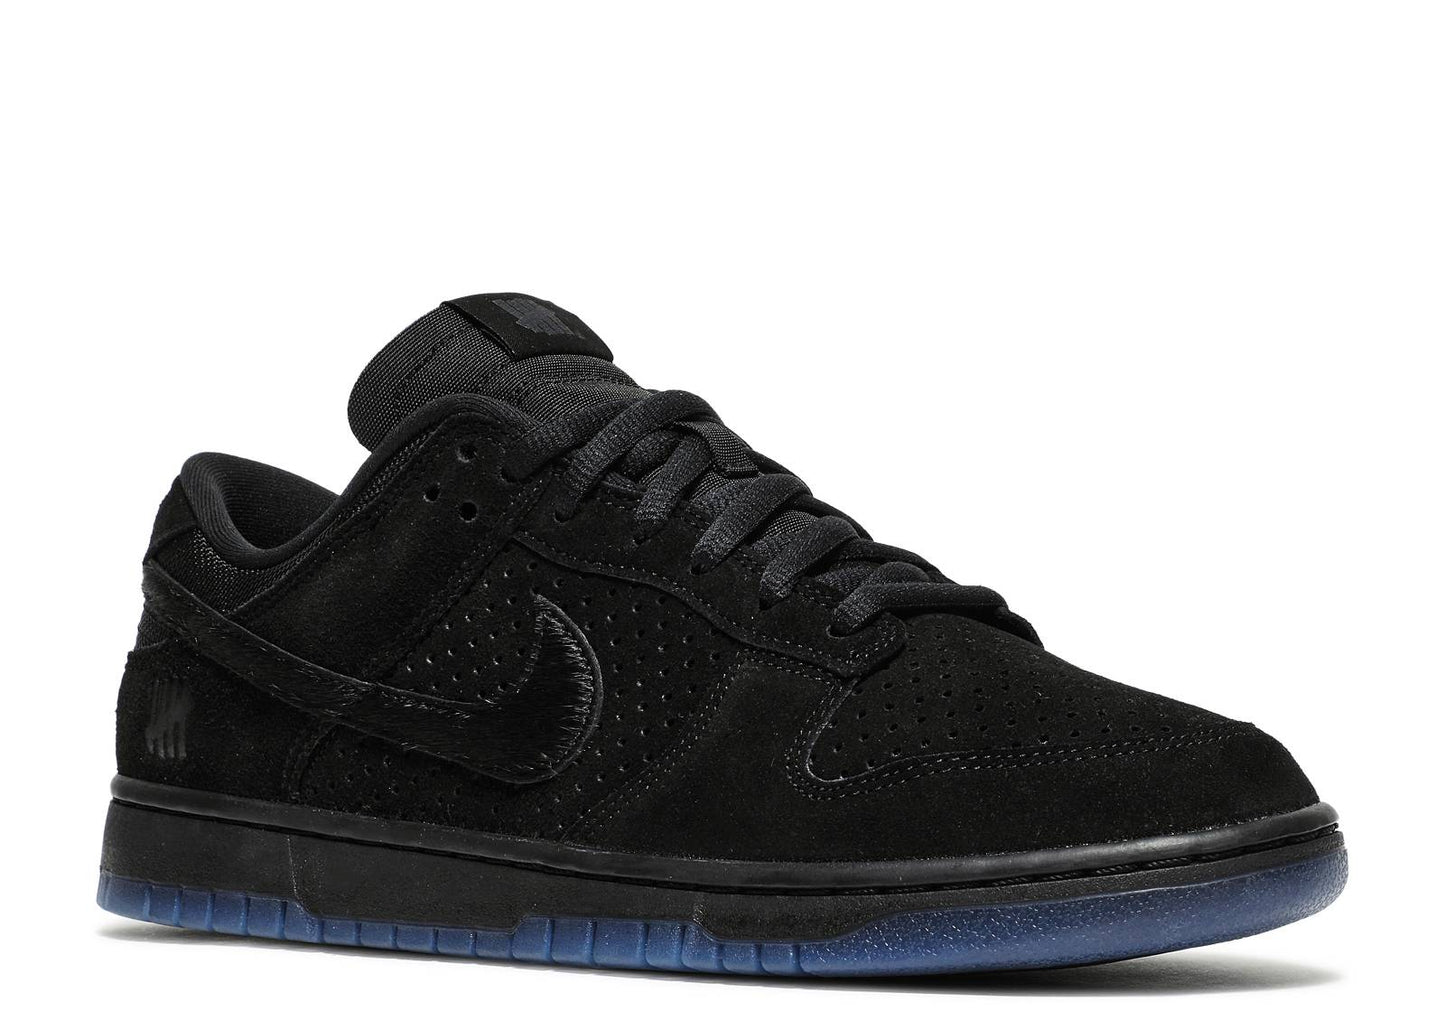 Undefeated x Nike Dunk Low SP "5 On It Black"